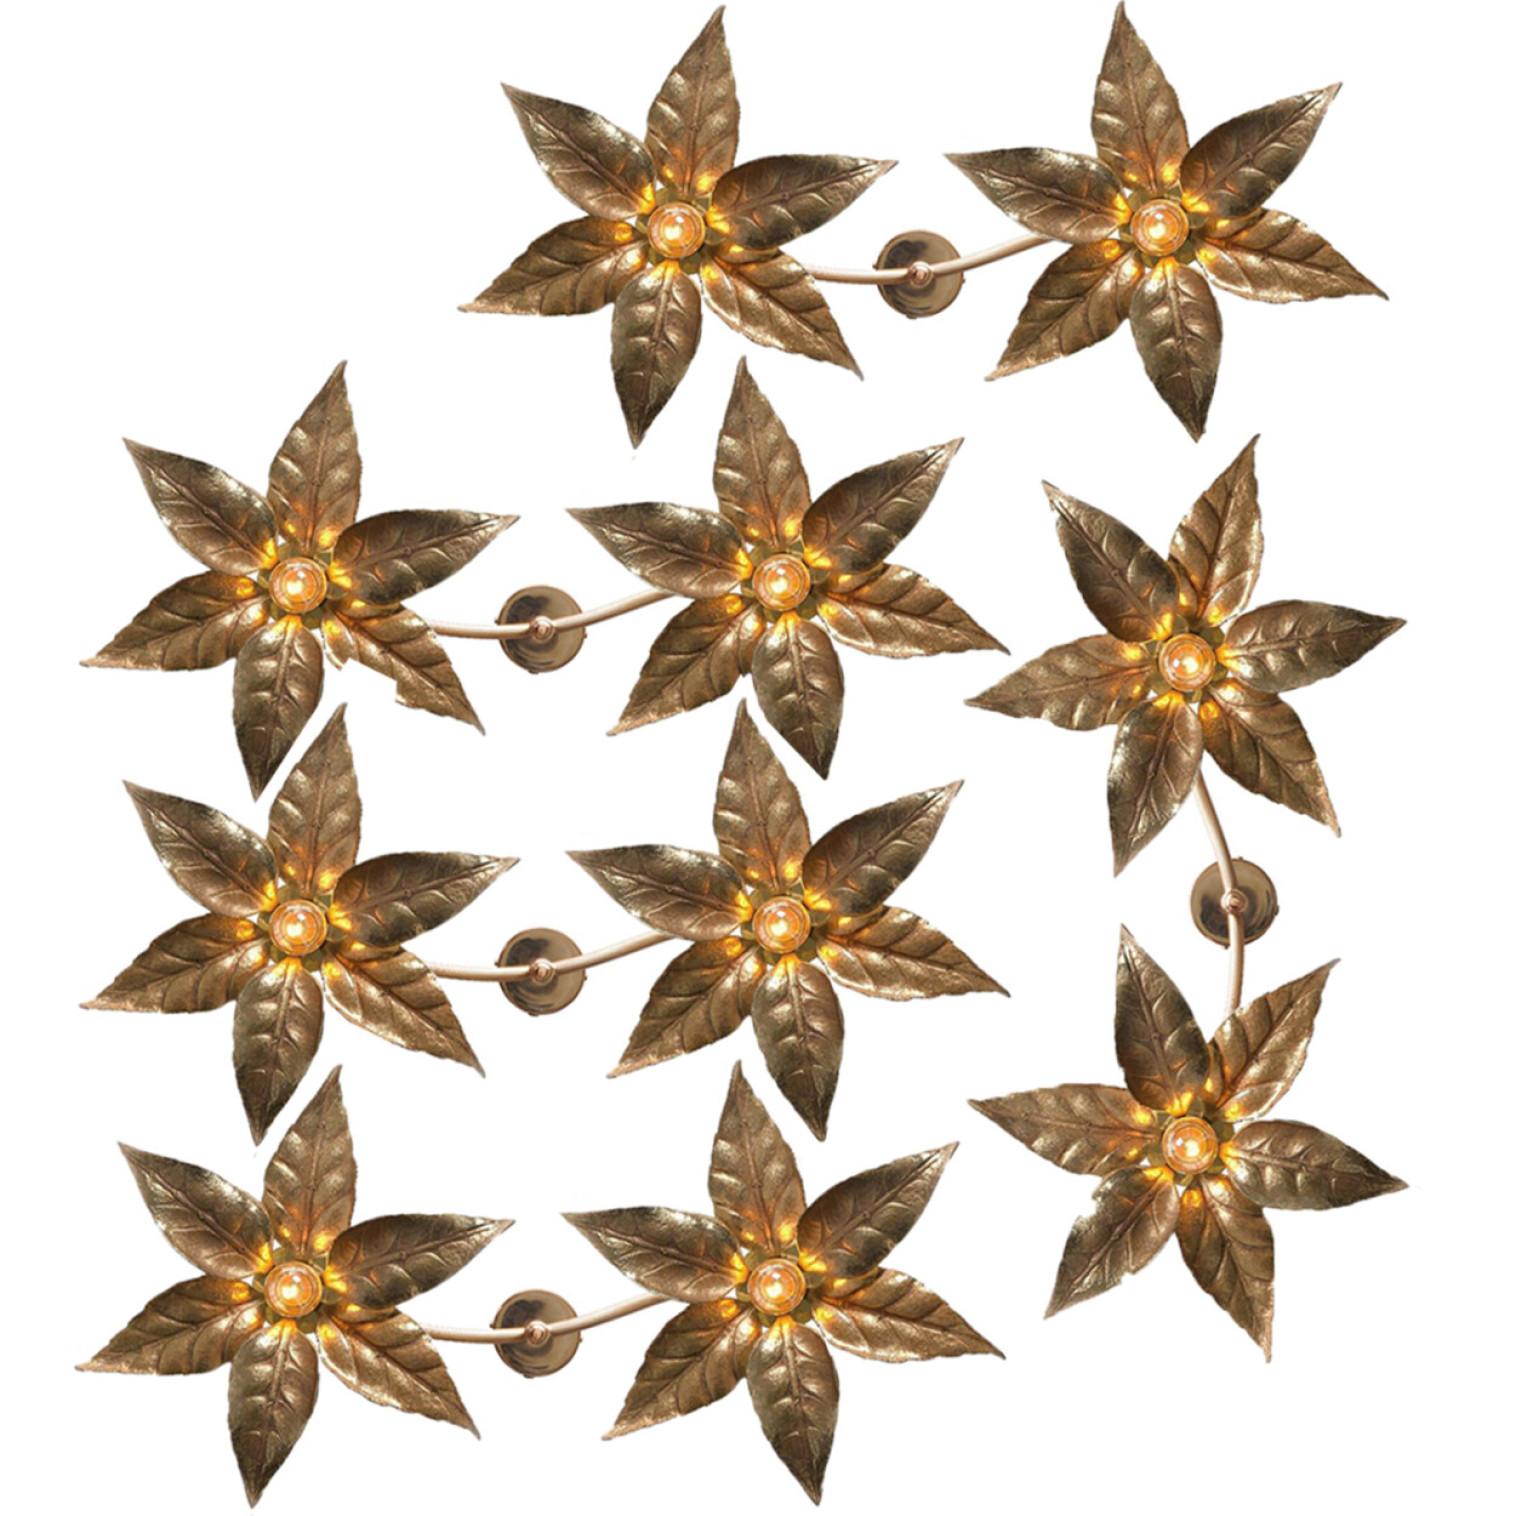 One of the five brass flowers wall sculptures in the style of designer Willy Daro manufactured by 'Massive Lighting', circa 1970s, Belgian. This decorative and beautiful large sculptural light consists of a pair of brass-plated flowers on a bar and